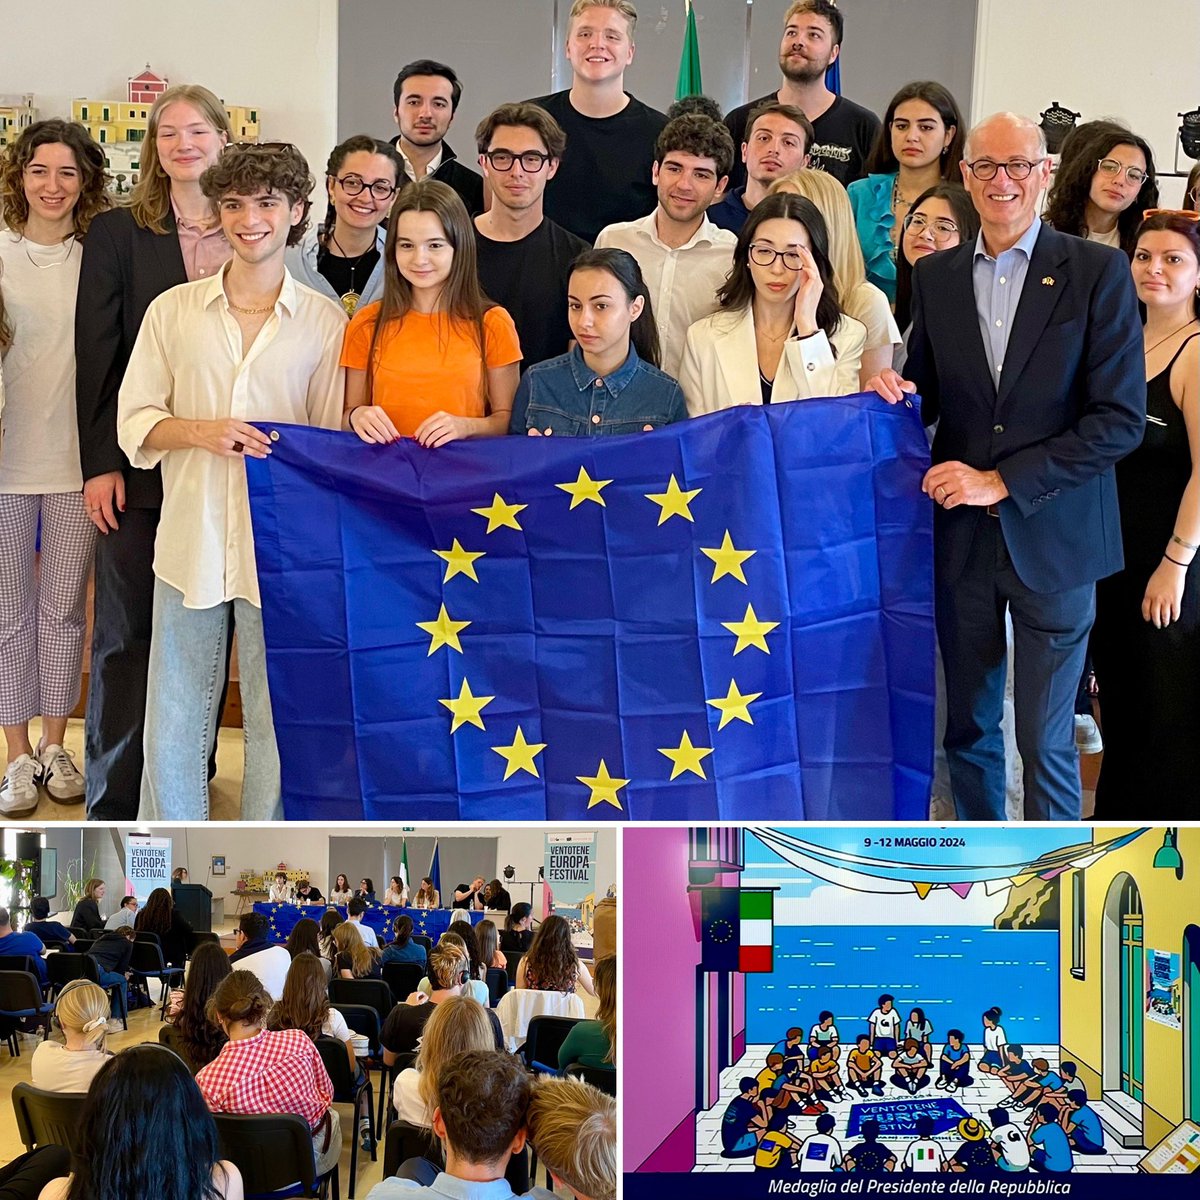 Rossi & Spinelli’s memories are alive and a source of inspiration for those who work hard to strengthen the #EuropeanUnion 🇪🇺🇧🇪 This weekend I’m in #Ventotene, representing the Belgian Presidency of the @EUCouncil, engaging with youngsters about the future of our #EU #EU2024BE